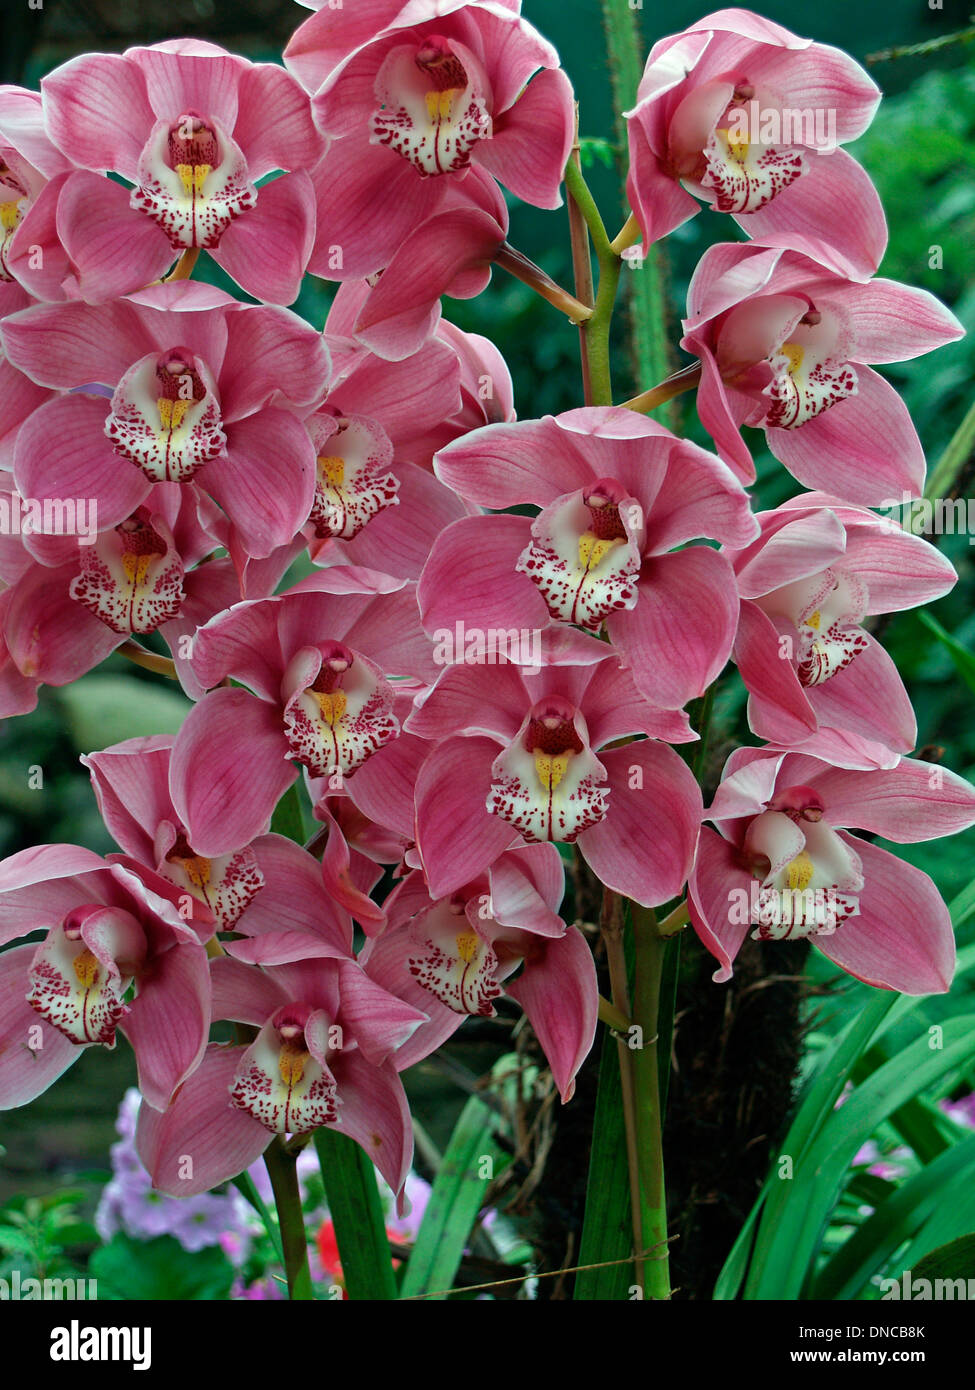 Orcids at the Orchid Festival in Gangtok,Sikkim Stock Photo